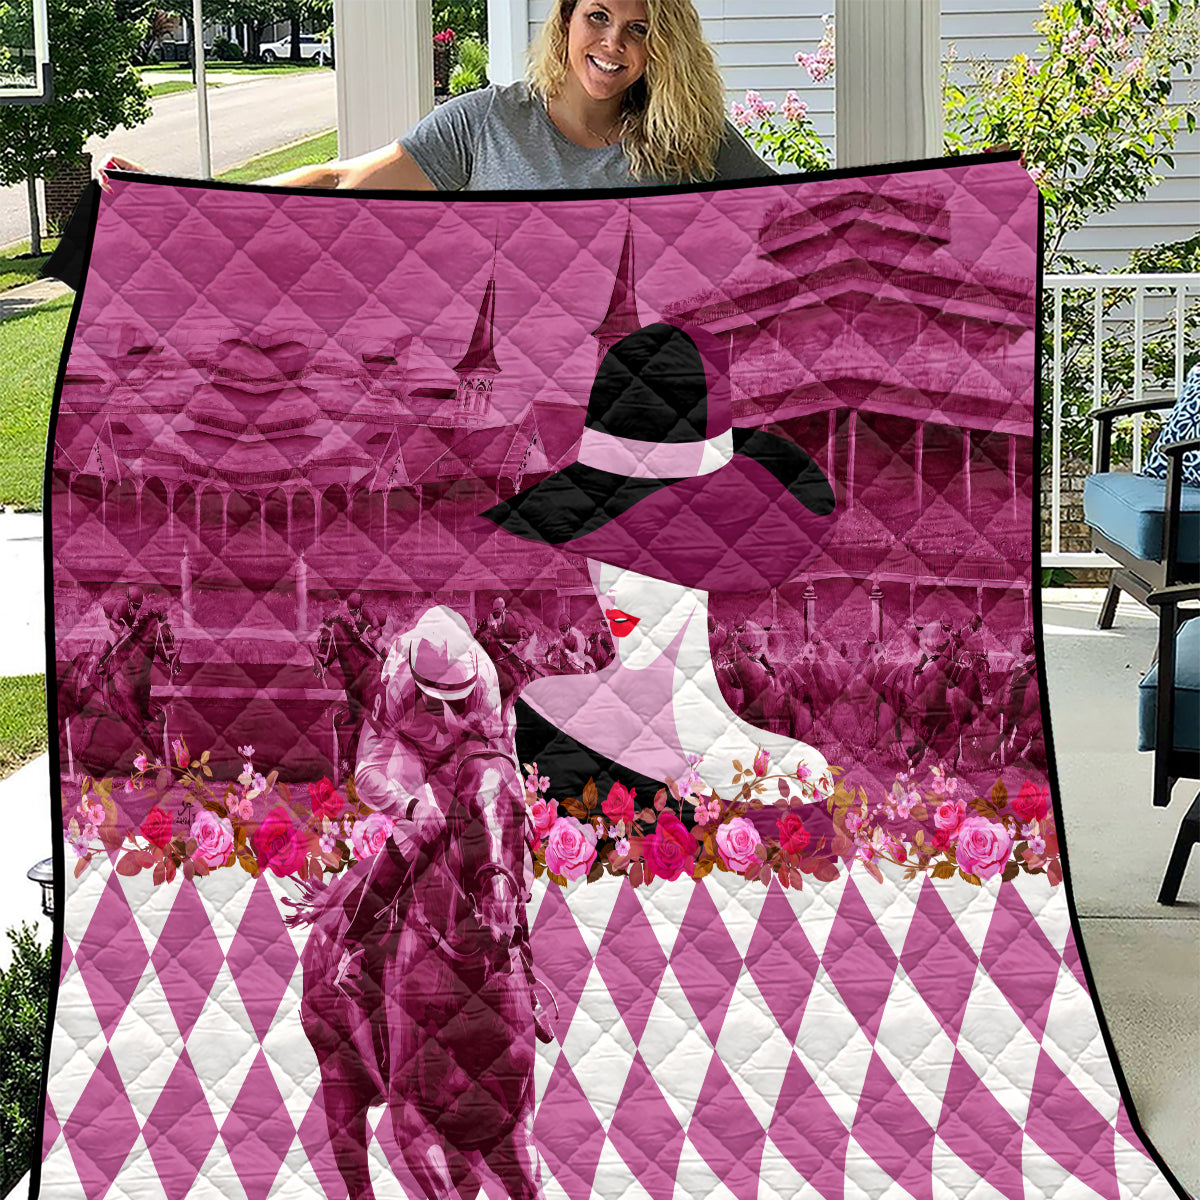 Kentucky Racing Horses Derby Hat Lady Quilt Churchill Downs and Roses Pink Out